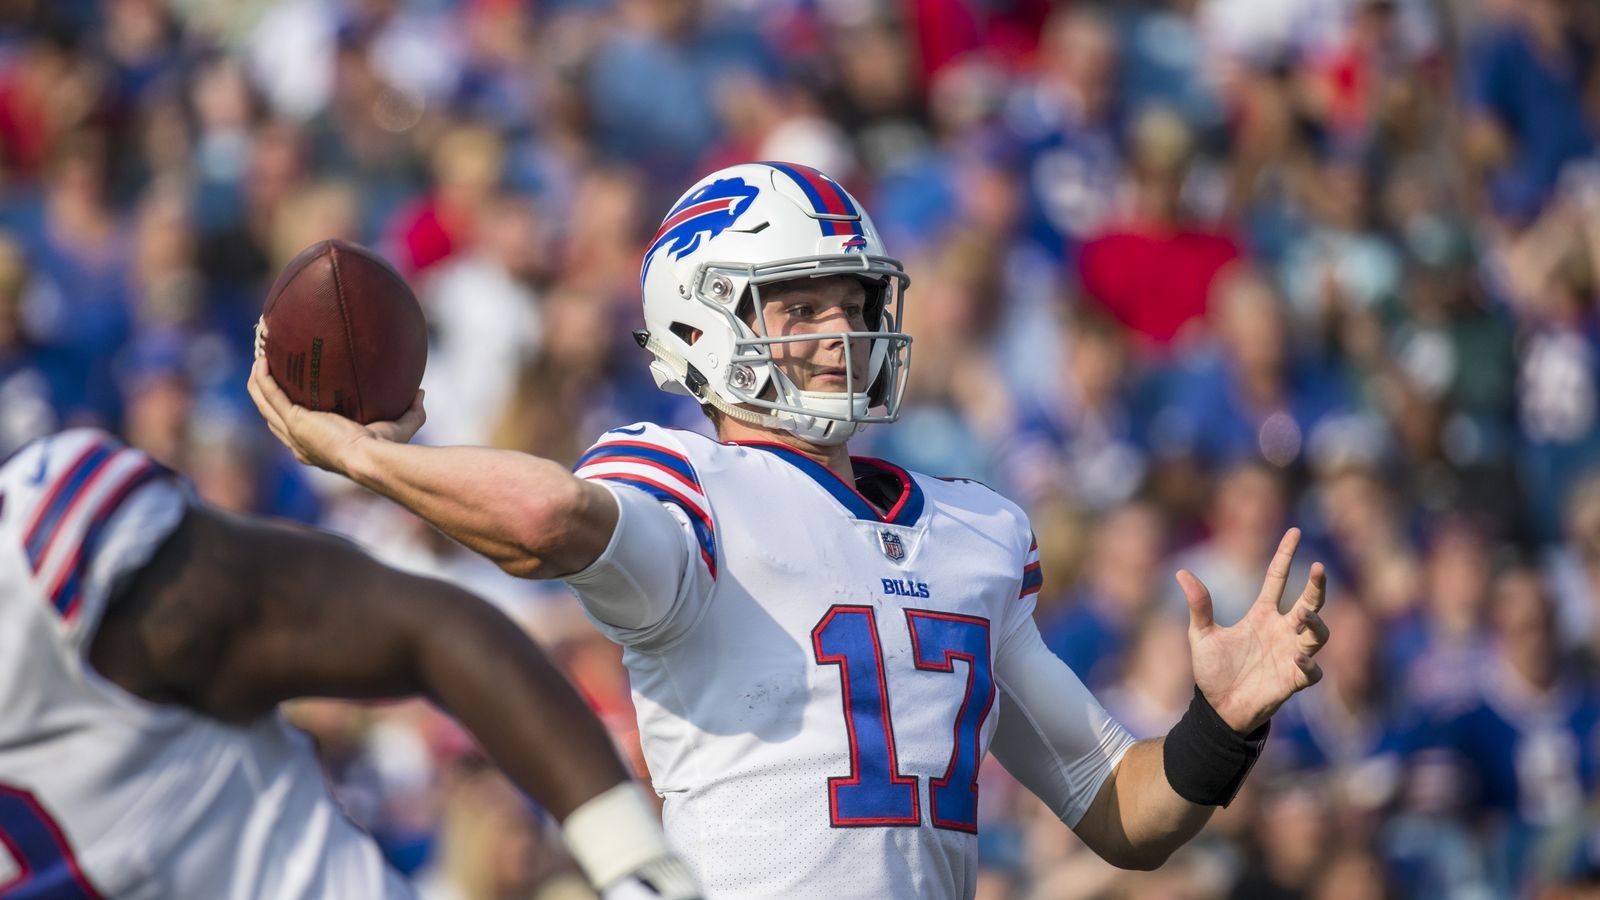 With Buffalo Bills down 40-0, Josh Allen sees first NFL game action ...